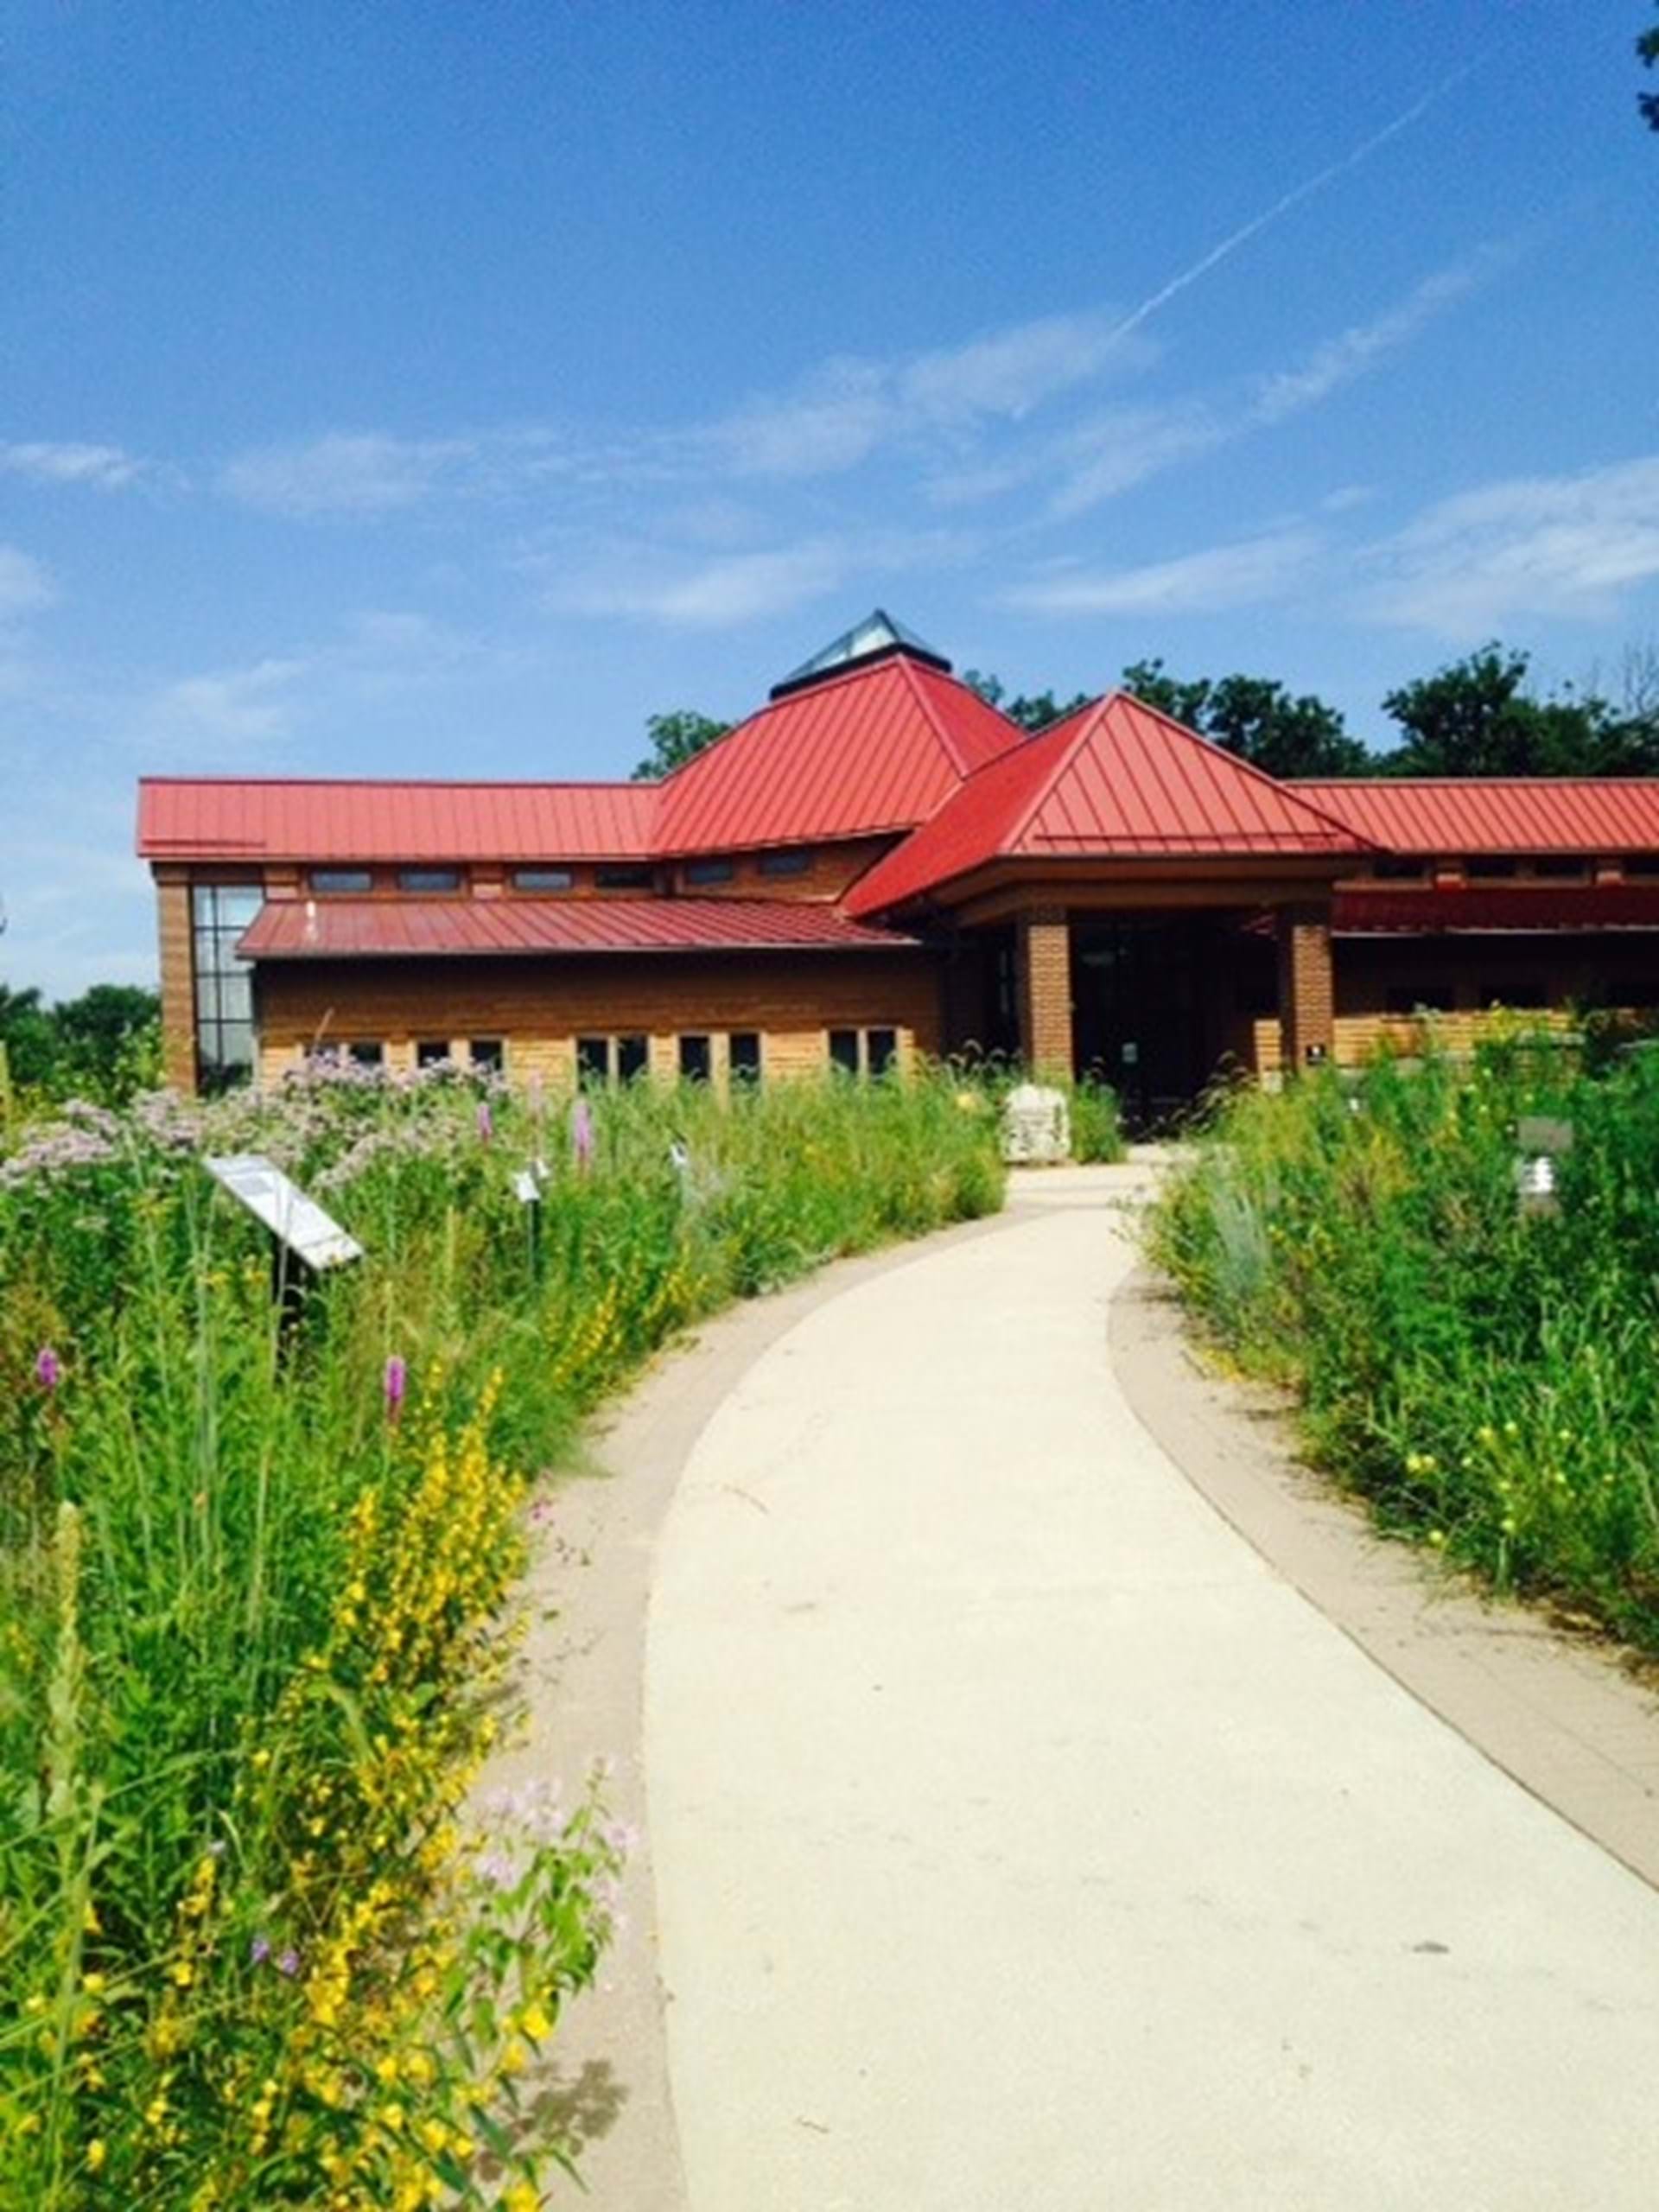 Wickiup Hill Learning Center is located just a few minutes northwest of Cedar Rapids